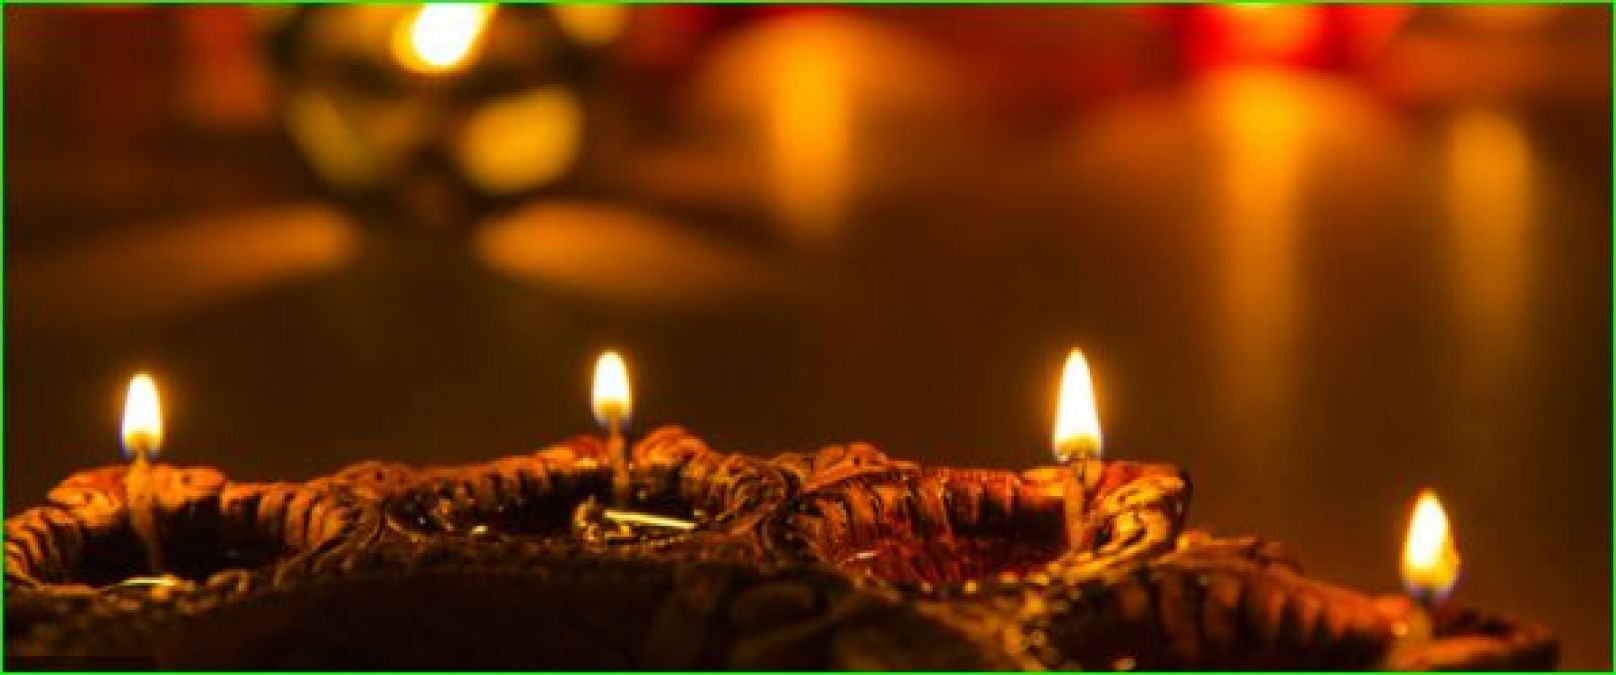 Know about auspicious occasions and time that occurs during Diwali days